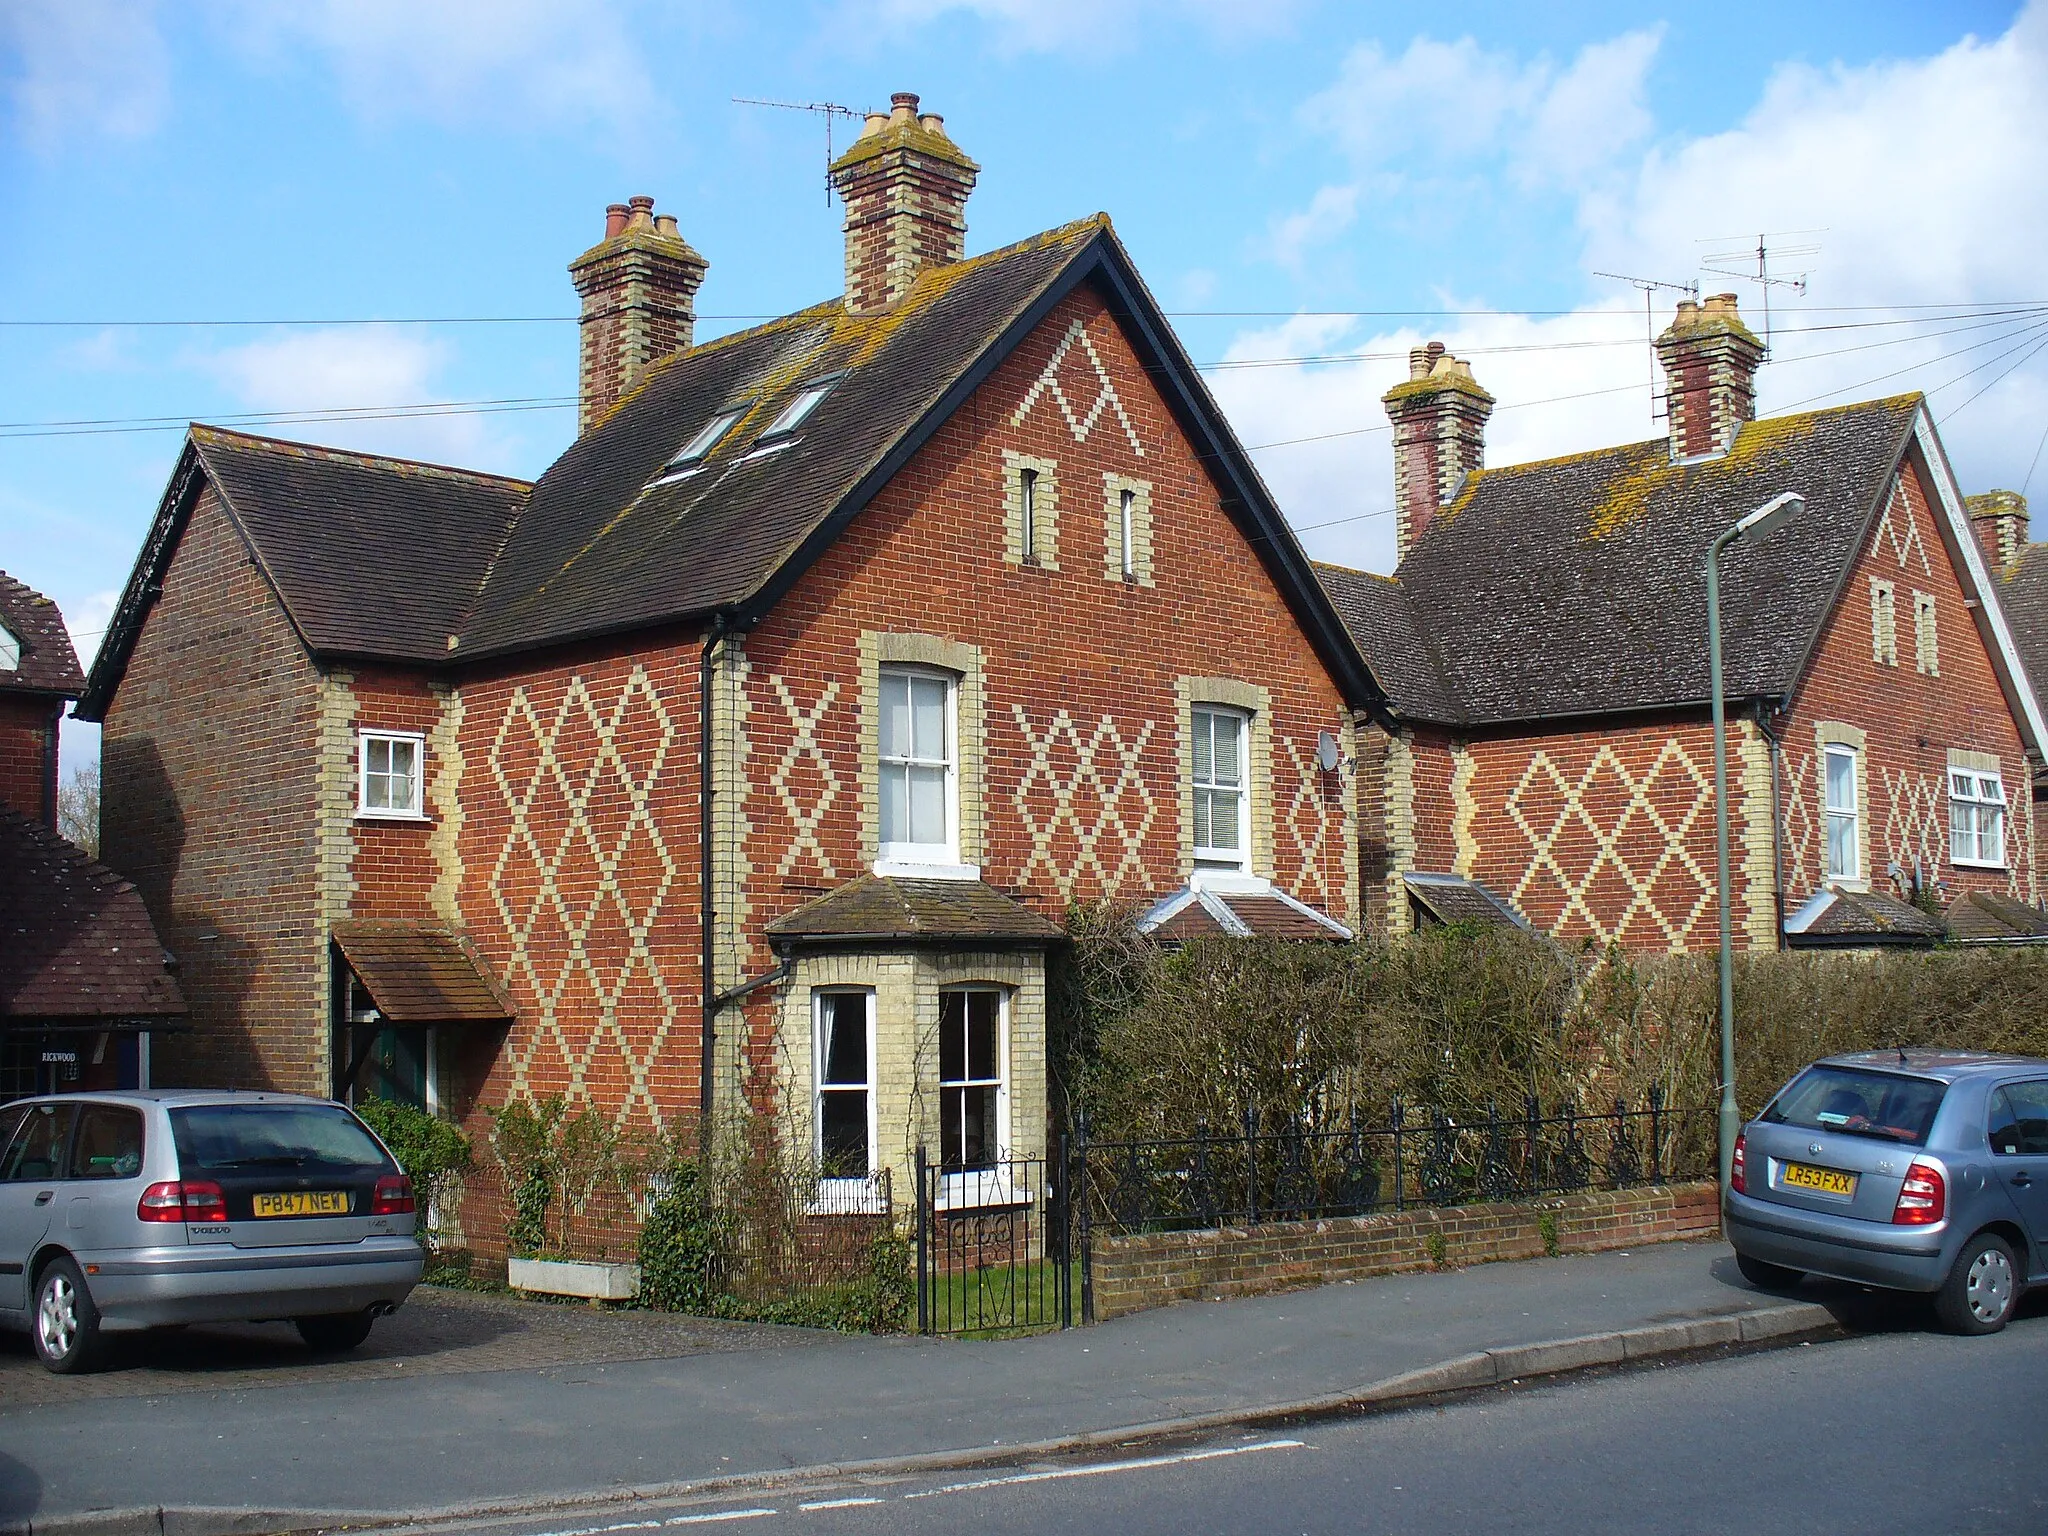 Photo showing: Diamonds are Forever Attractive diamond patterns in the brickwork on these houses in Chilworth. This diamond pattern is common in Surrey.